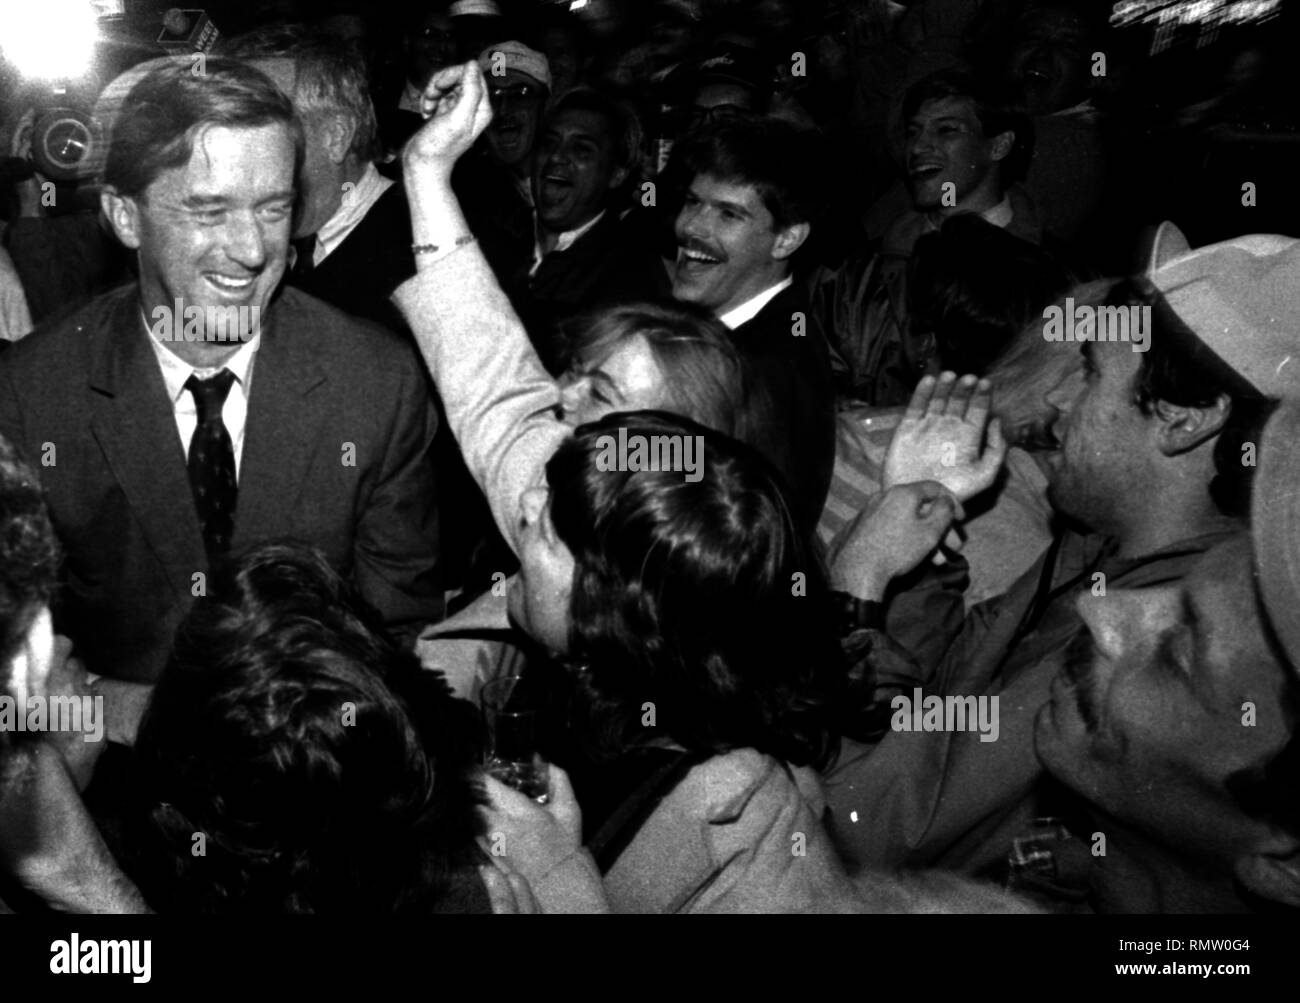 Former Massachusetts Governor Bill Weld announced he will run against President Donald Trump for the Republican Presidential nomination in 2020. In this photo Massachusetts Governor Bill Weld (R) during a campaign event at Foley's Tavern in Boston Ma USA photo by bill Belknap 1995 Stock Photo